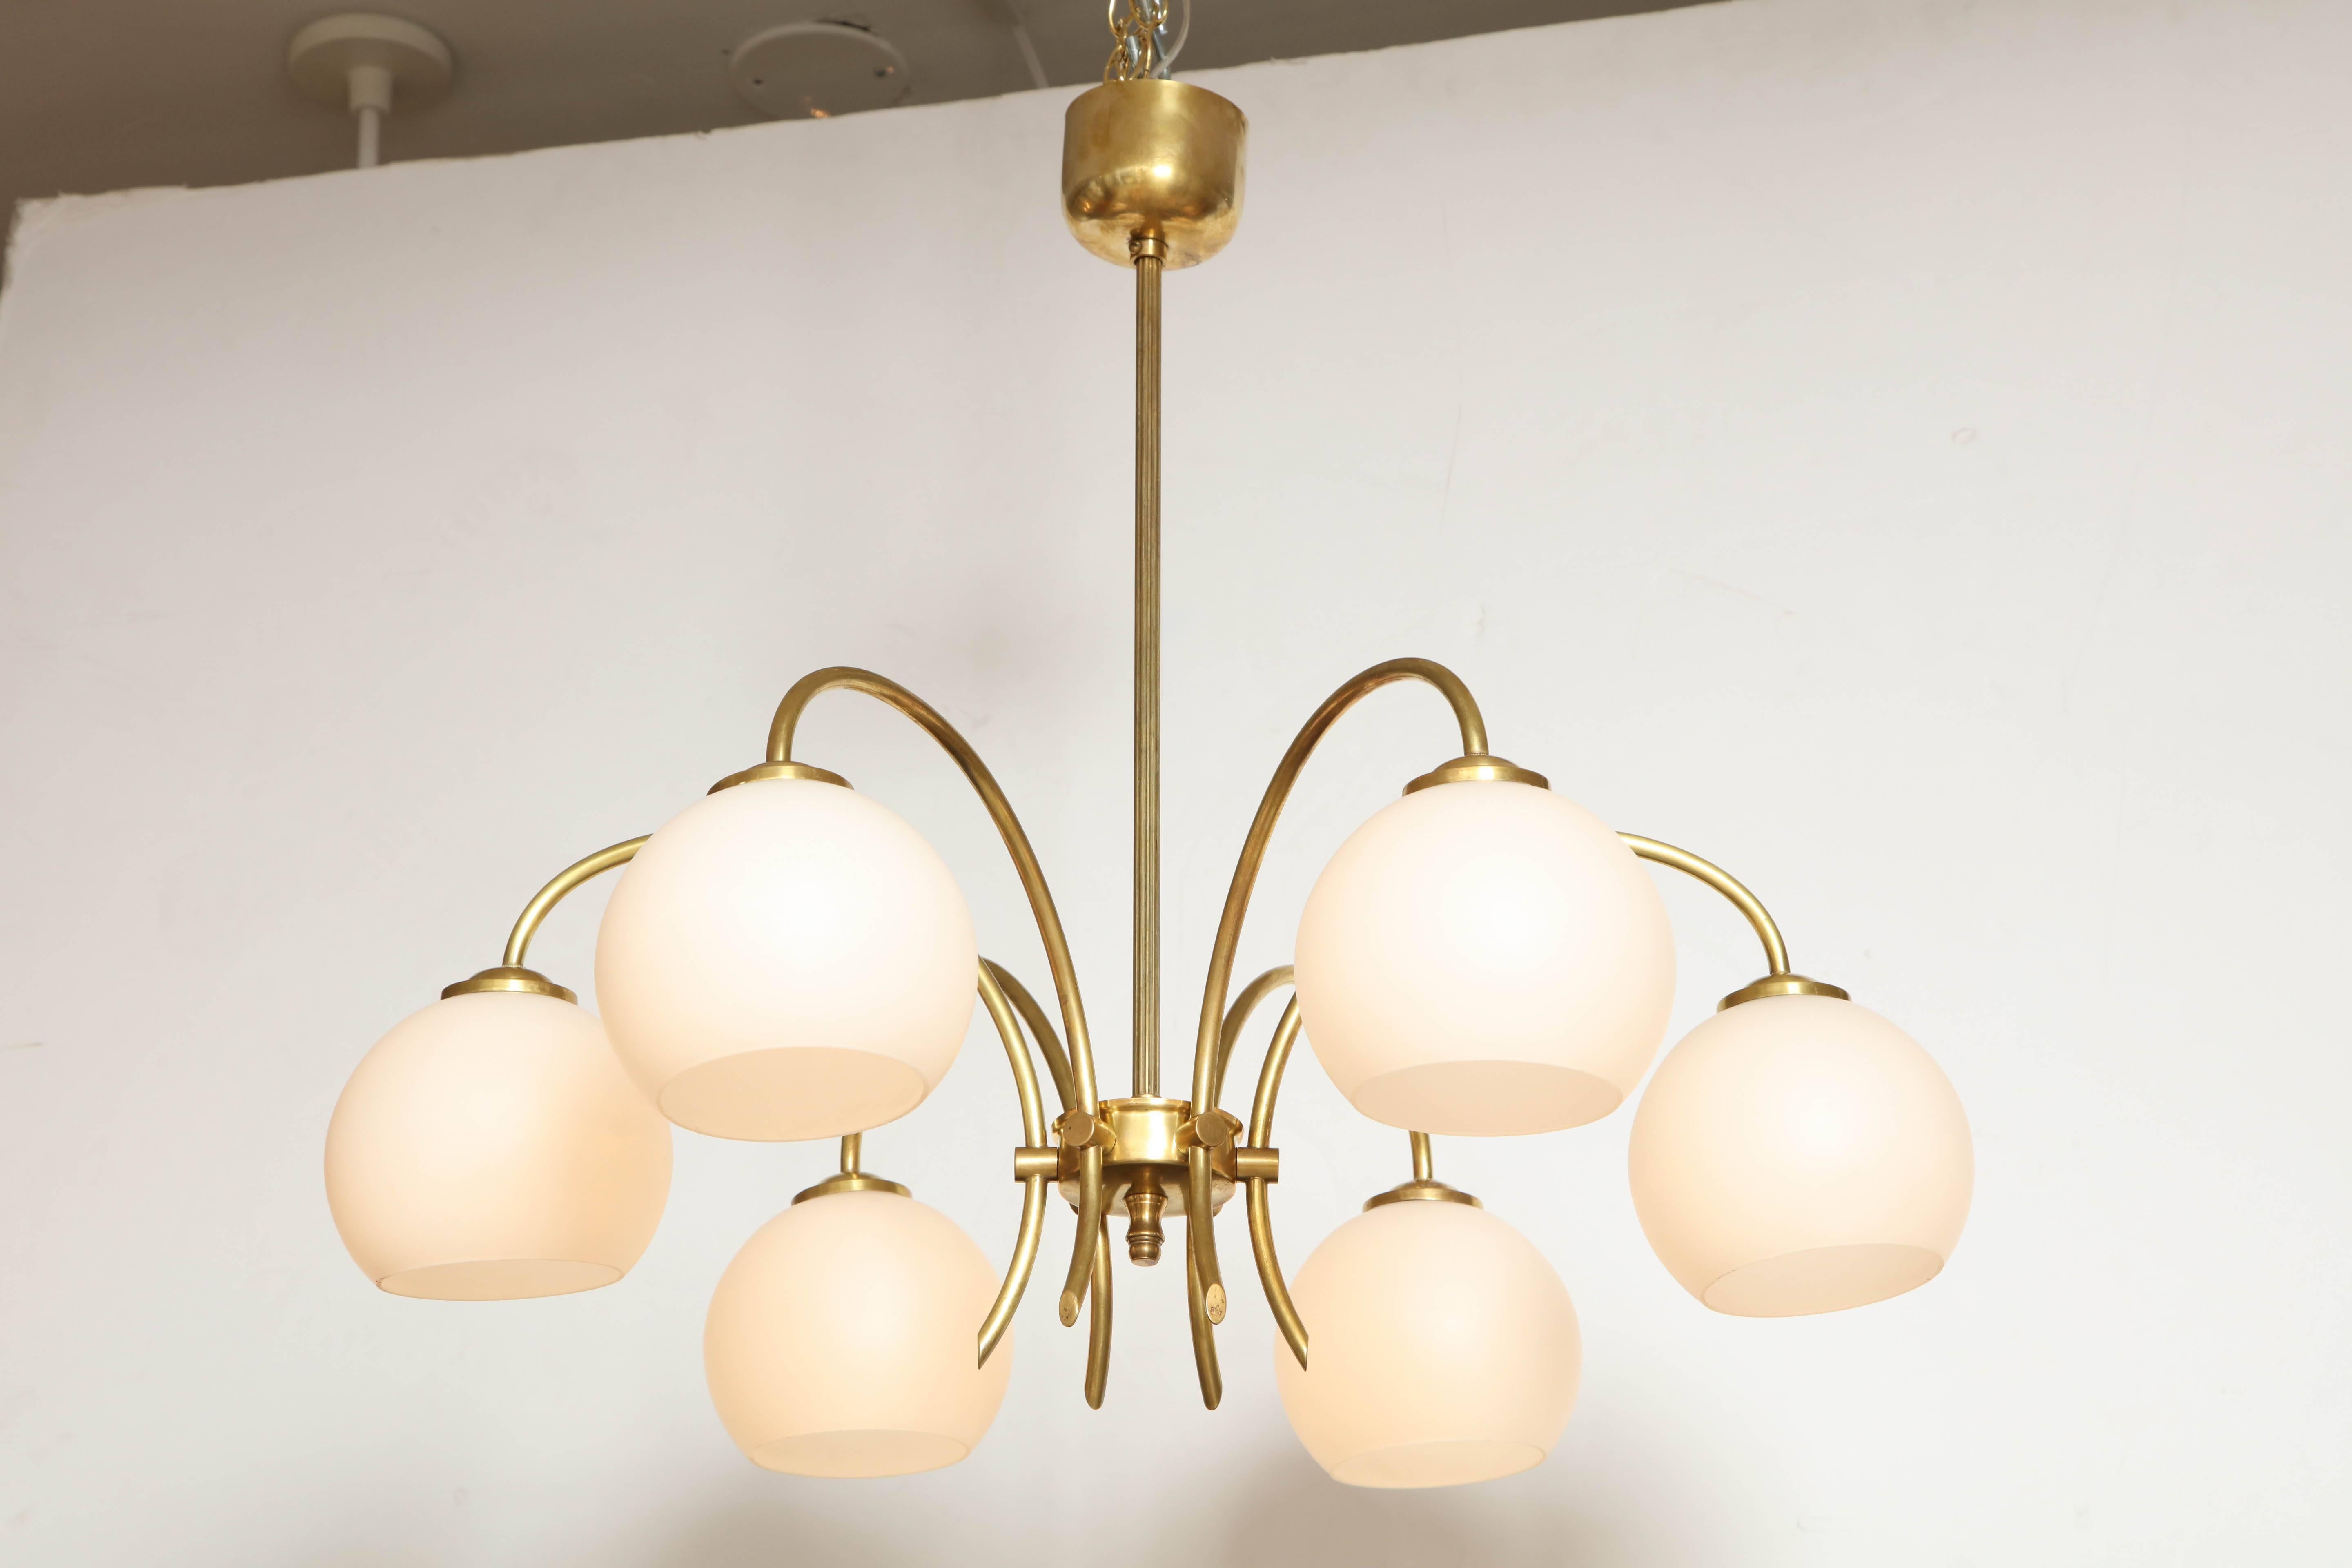 Danish six arched arm brass and milk glass chandelier, circa 1960s. A single reeded stem issuing six scrolled arms with rounded milk glass shades. Rewired for the US 6 x 60watts max.

Probably made by Fog & Mørup

 